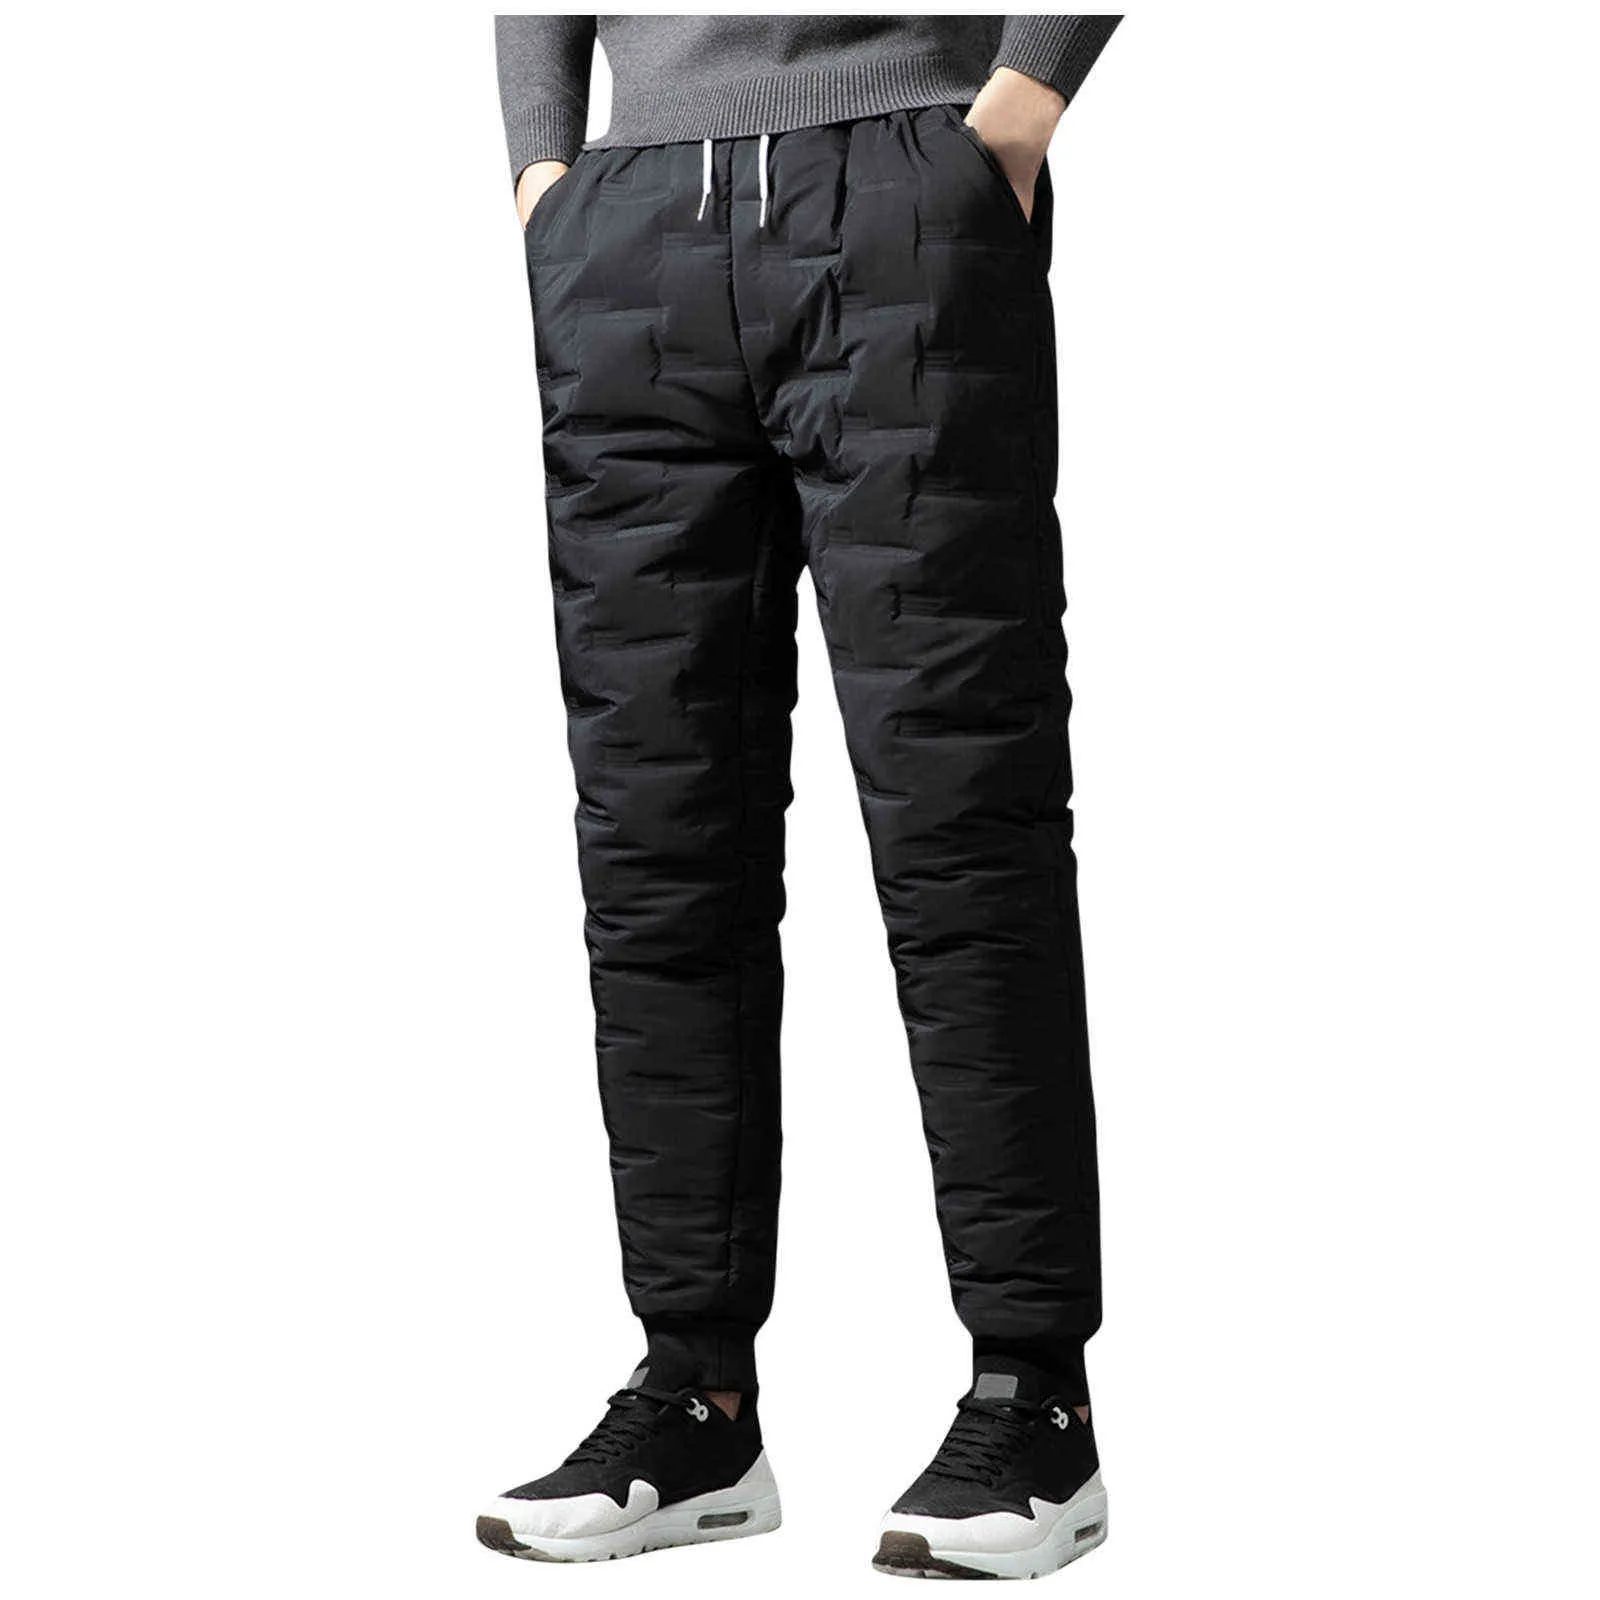 Men's Padded Trousers Cotton Trousers Casual Warm Solid Full Length  Leggings Pants Thickened Pocket Drawstring Pants Trousers 211201